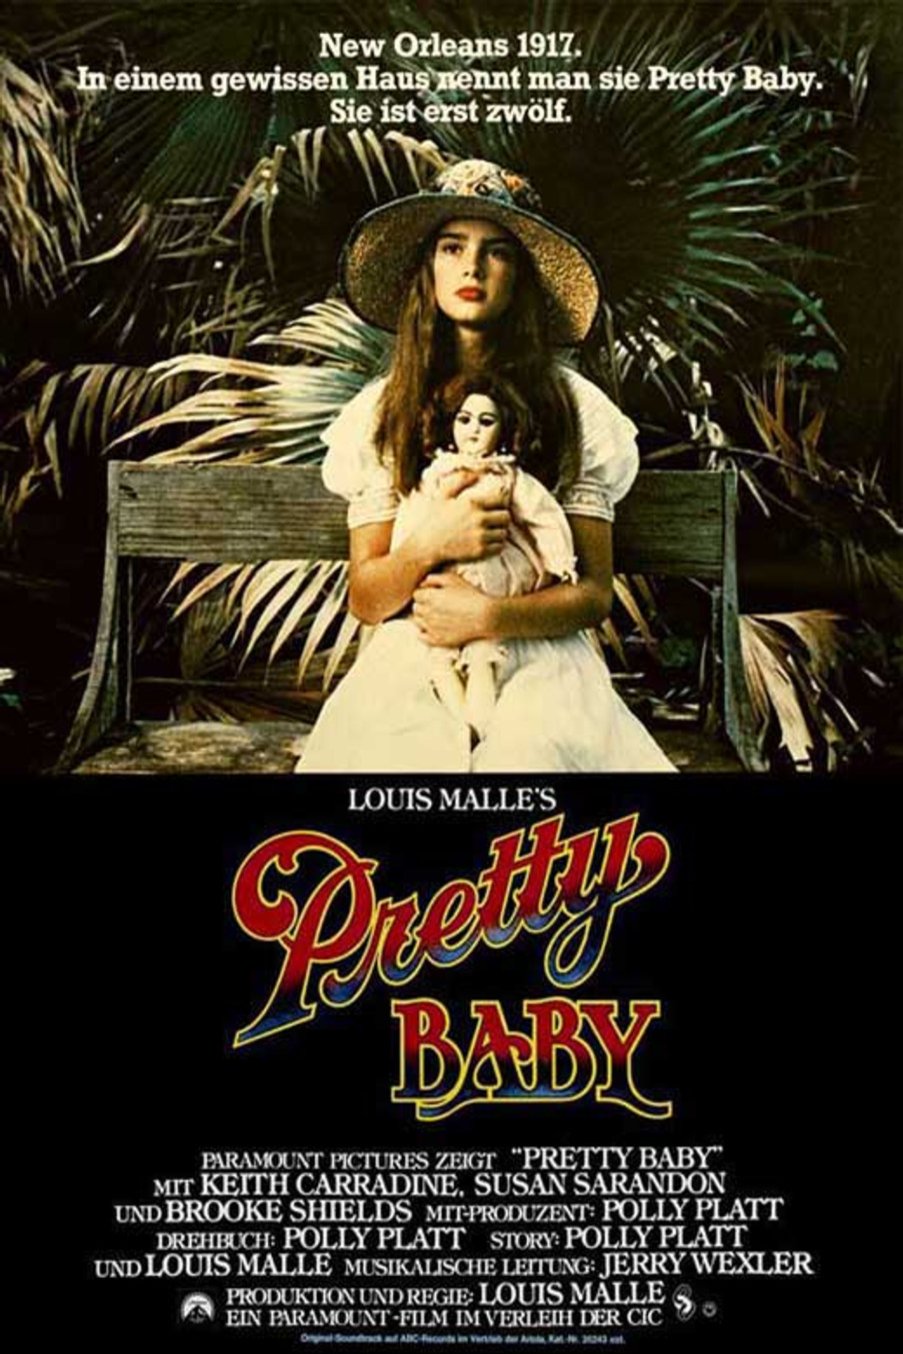 Pretty Baby (1978) by Louis Malle